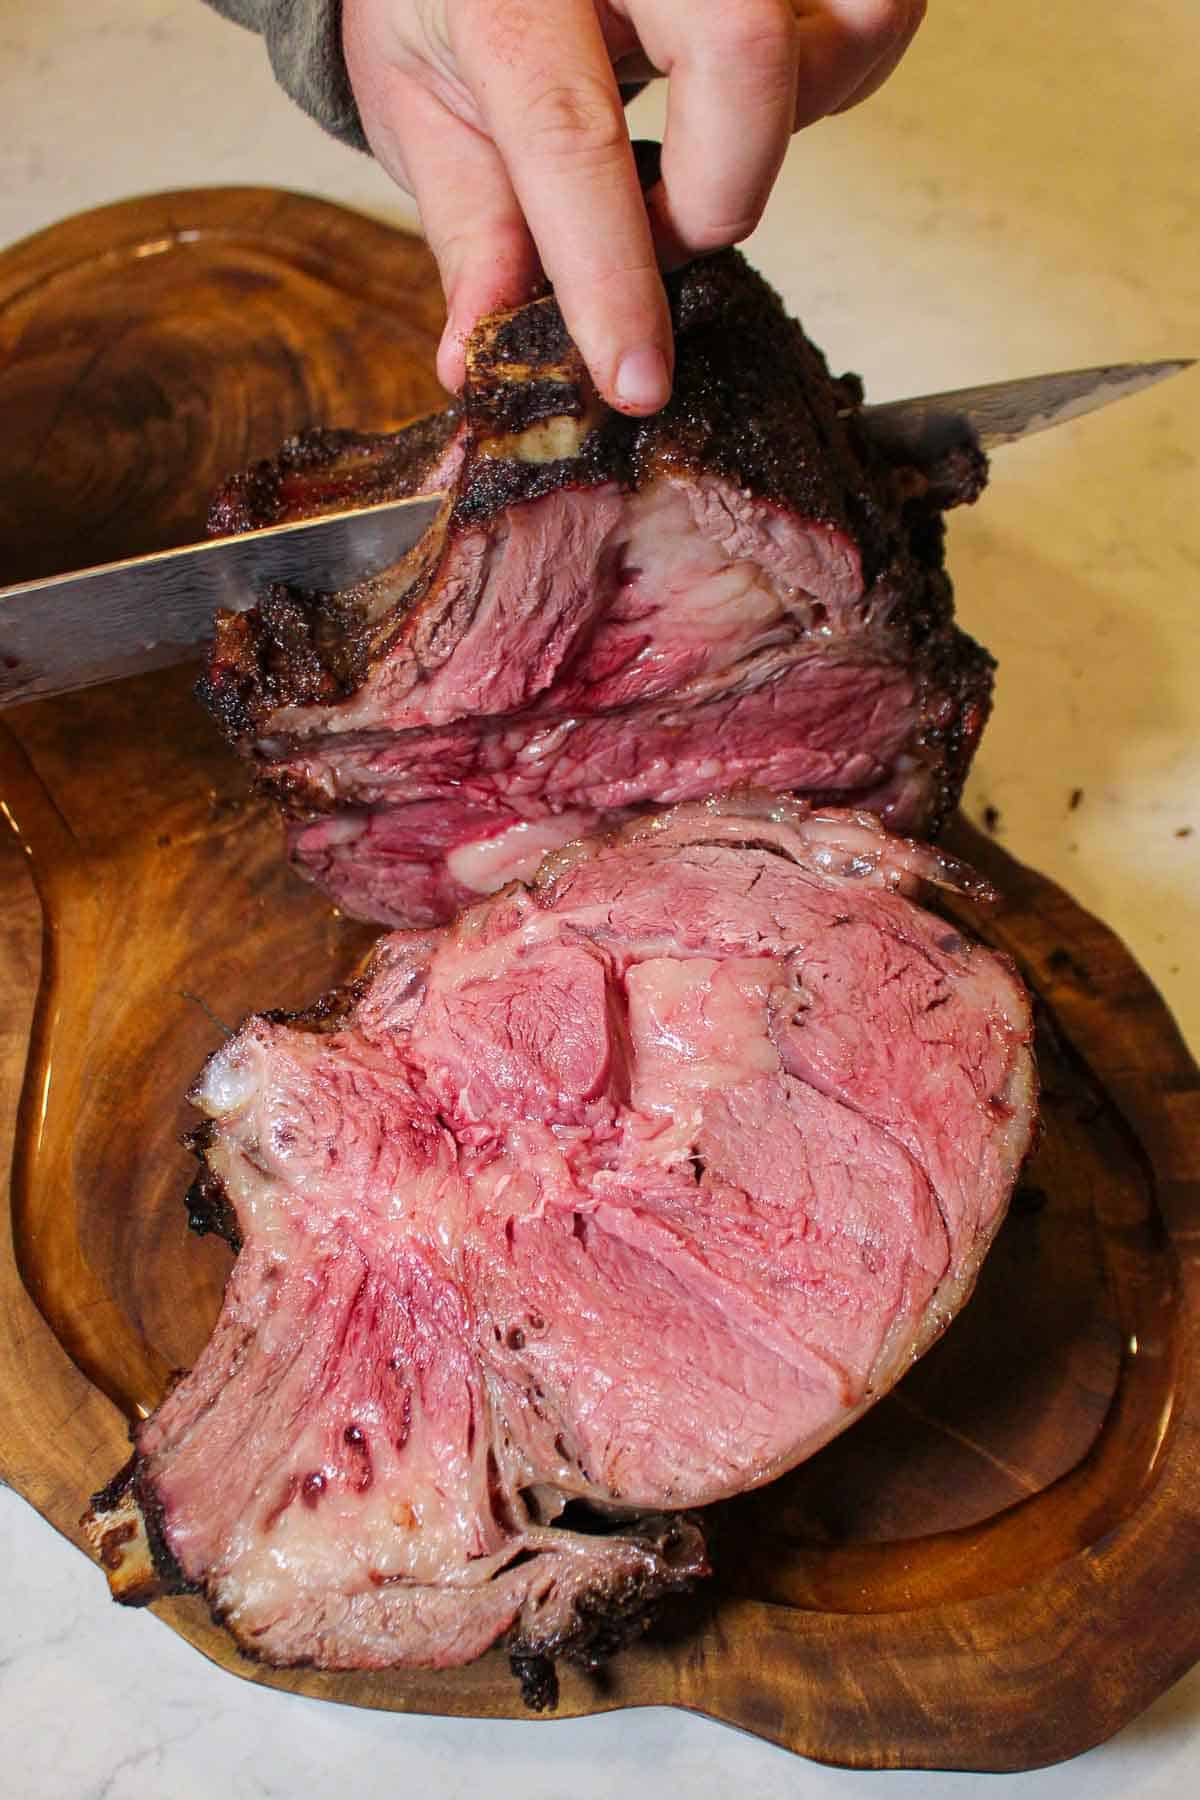 Slicing up our Rotisserie Prime Rib